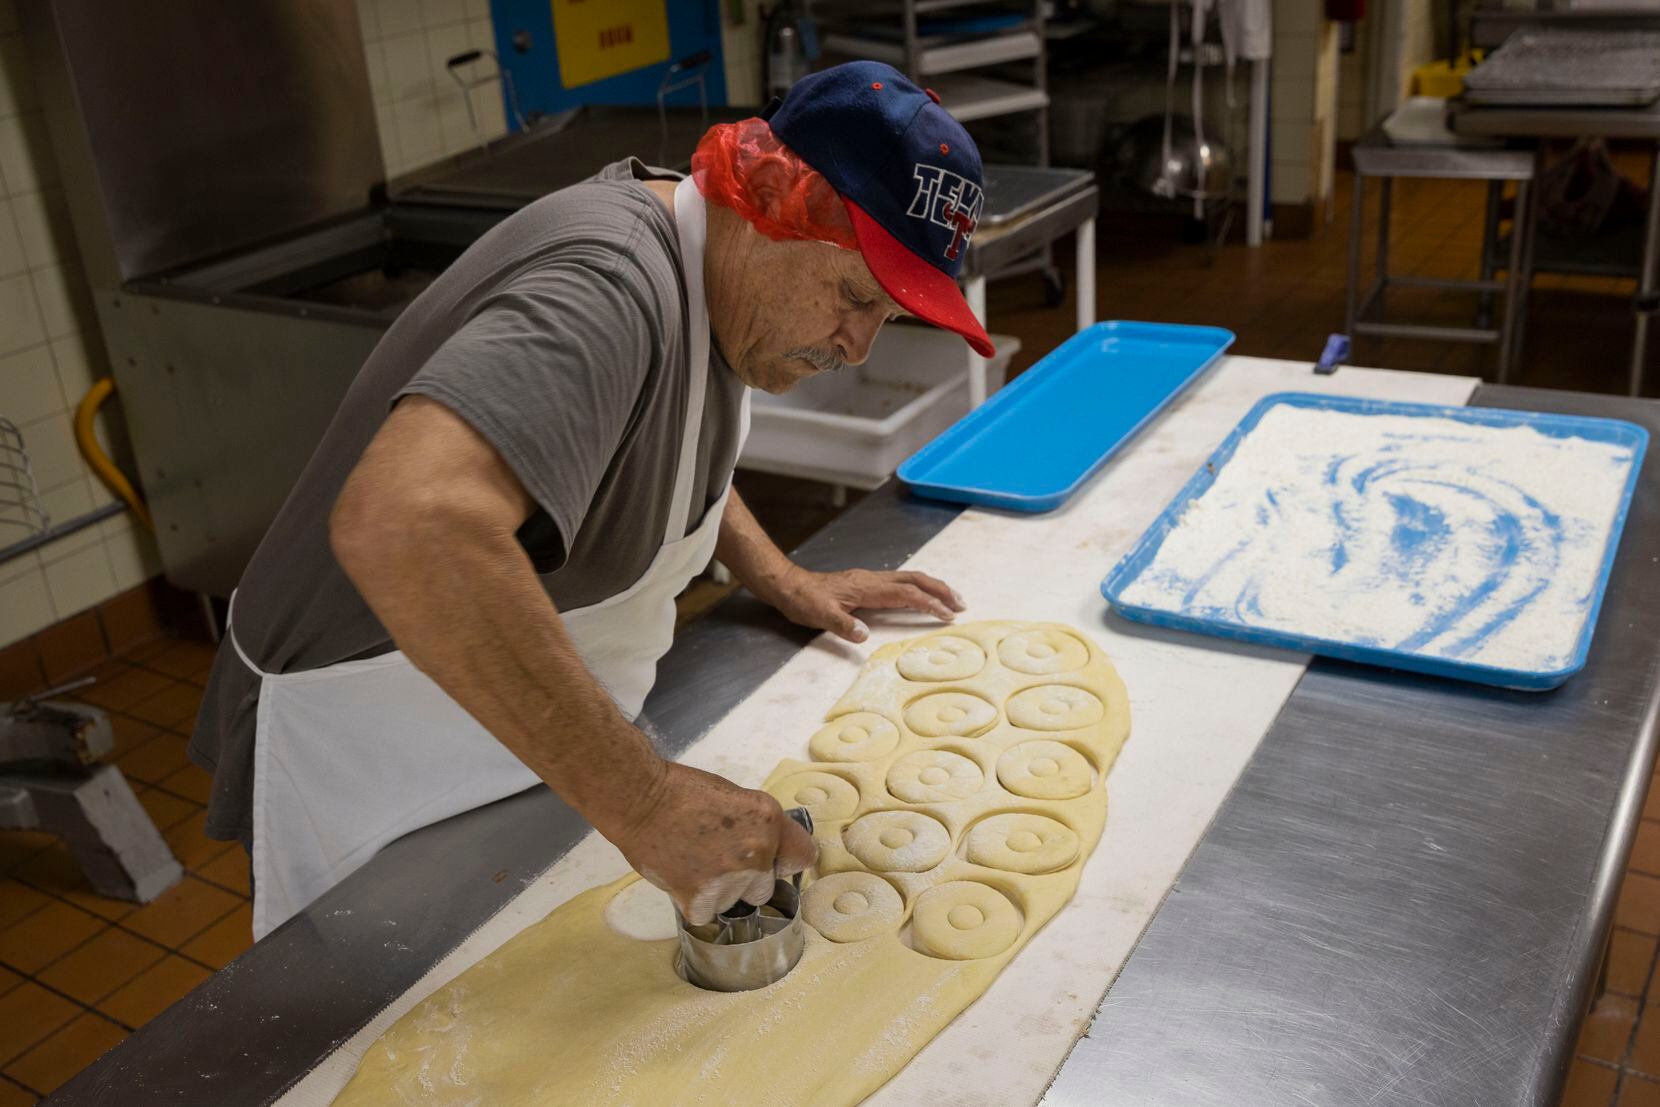 Tereso Mendoza, who has been working at Lone Star Donuts for over 30 years, cuts the donut...